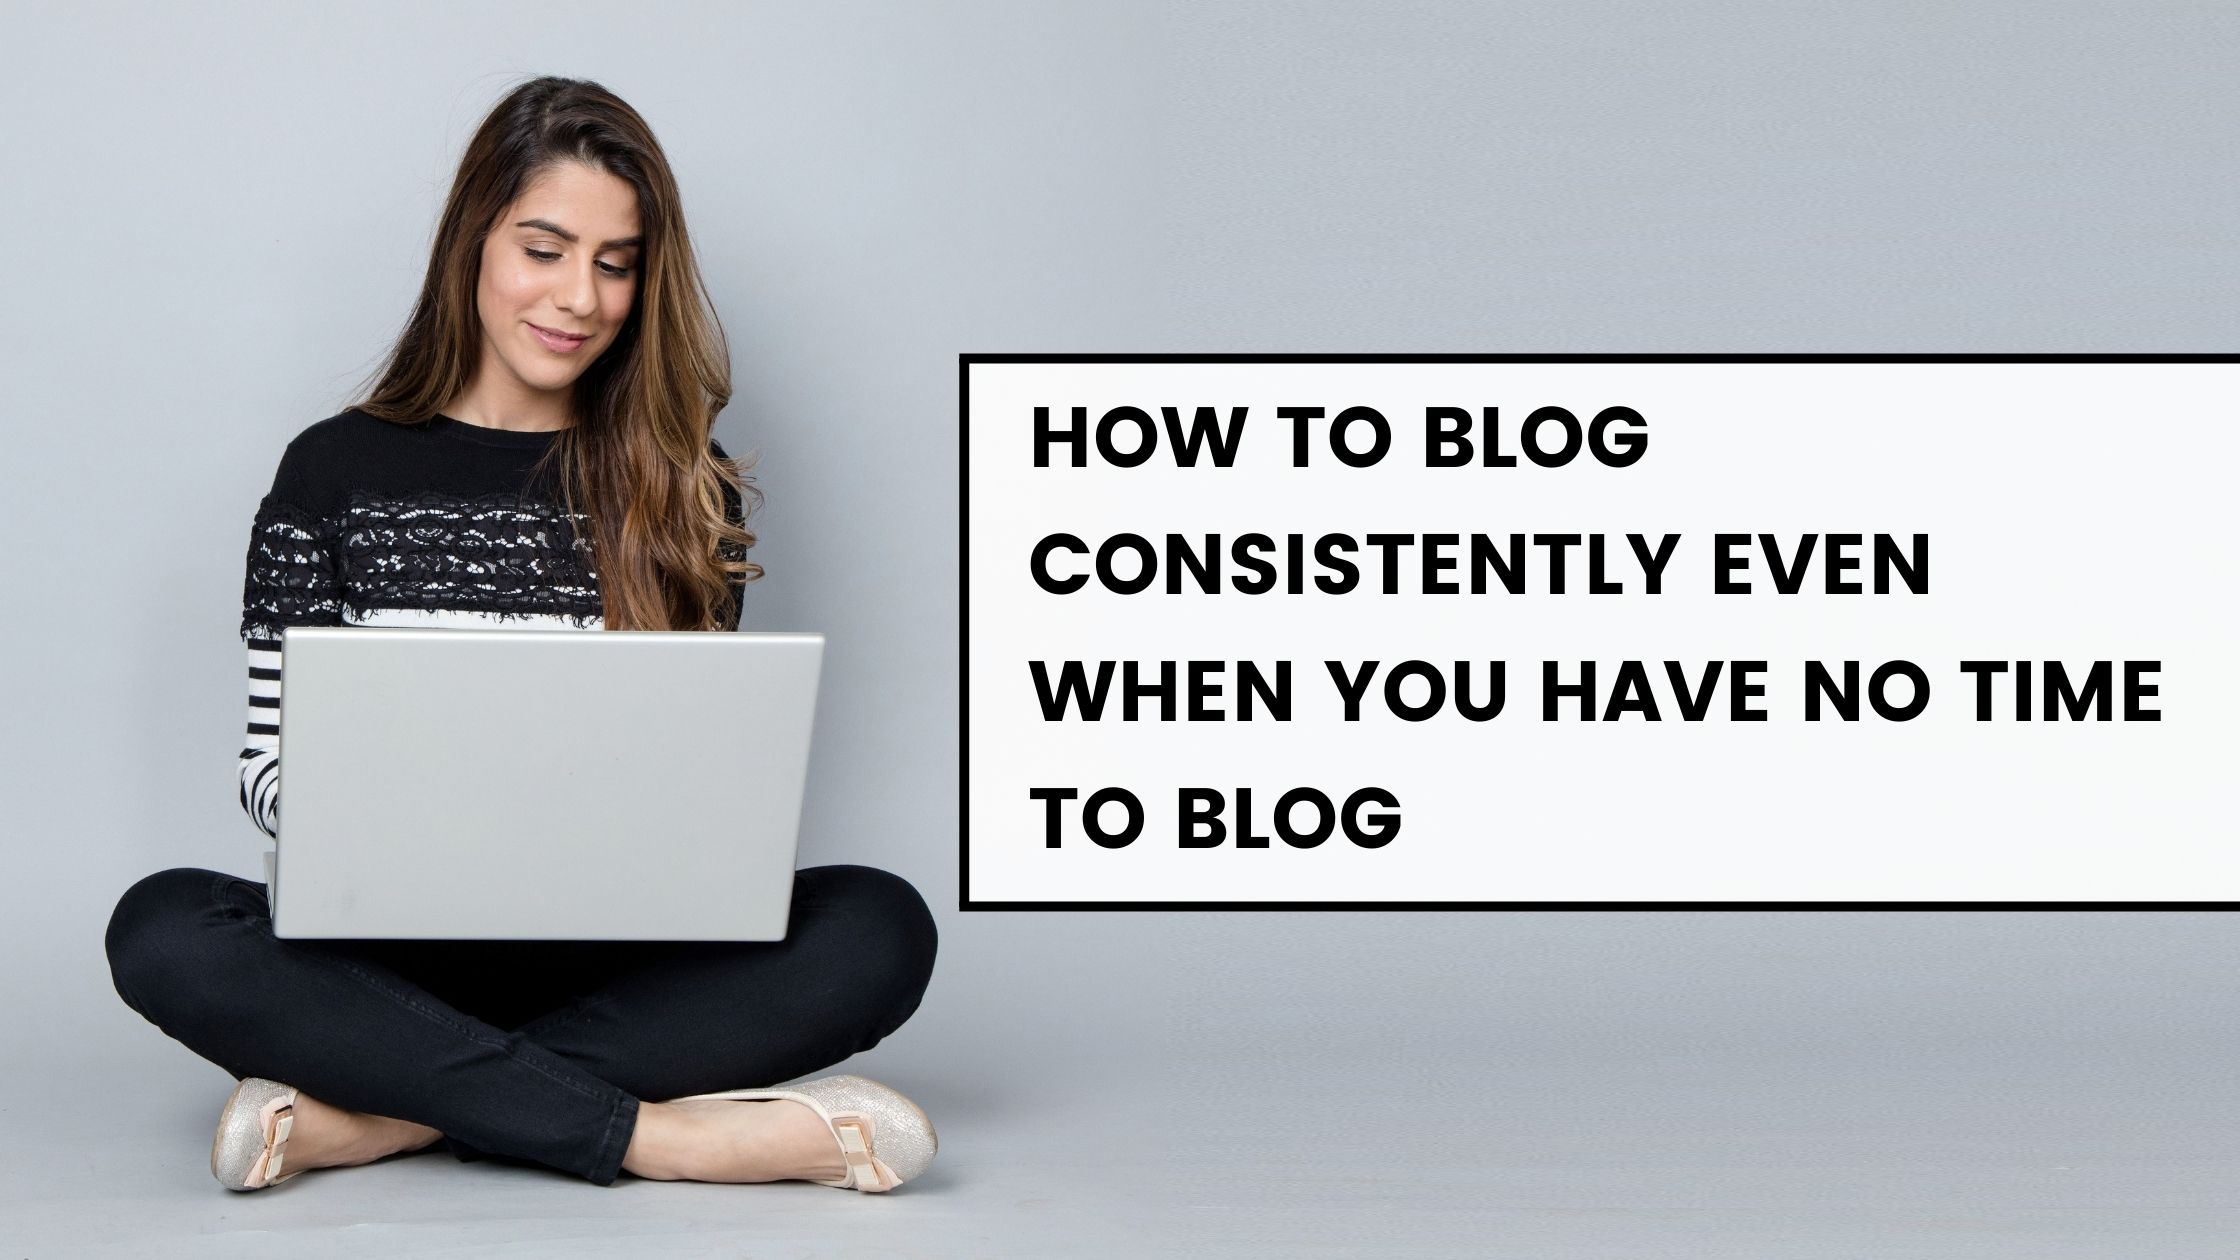 How to blog consistently even when you have no time to blog